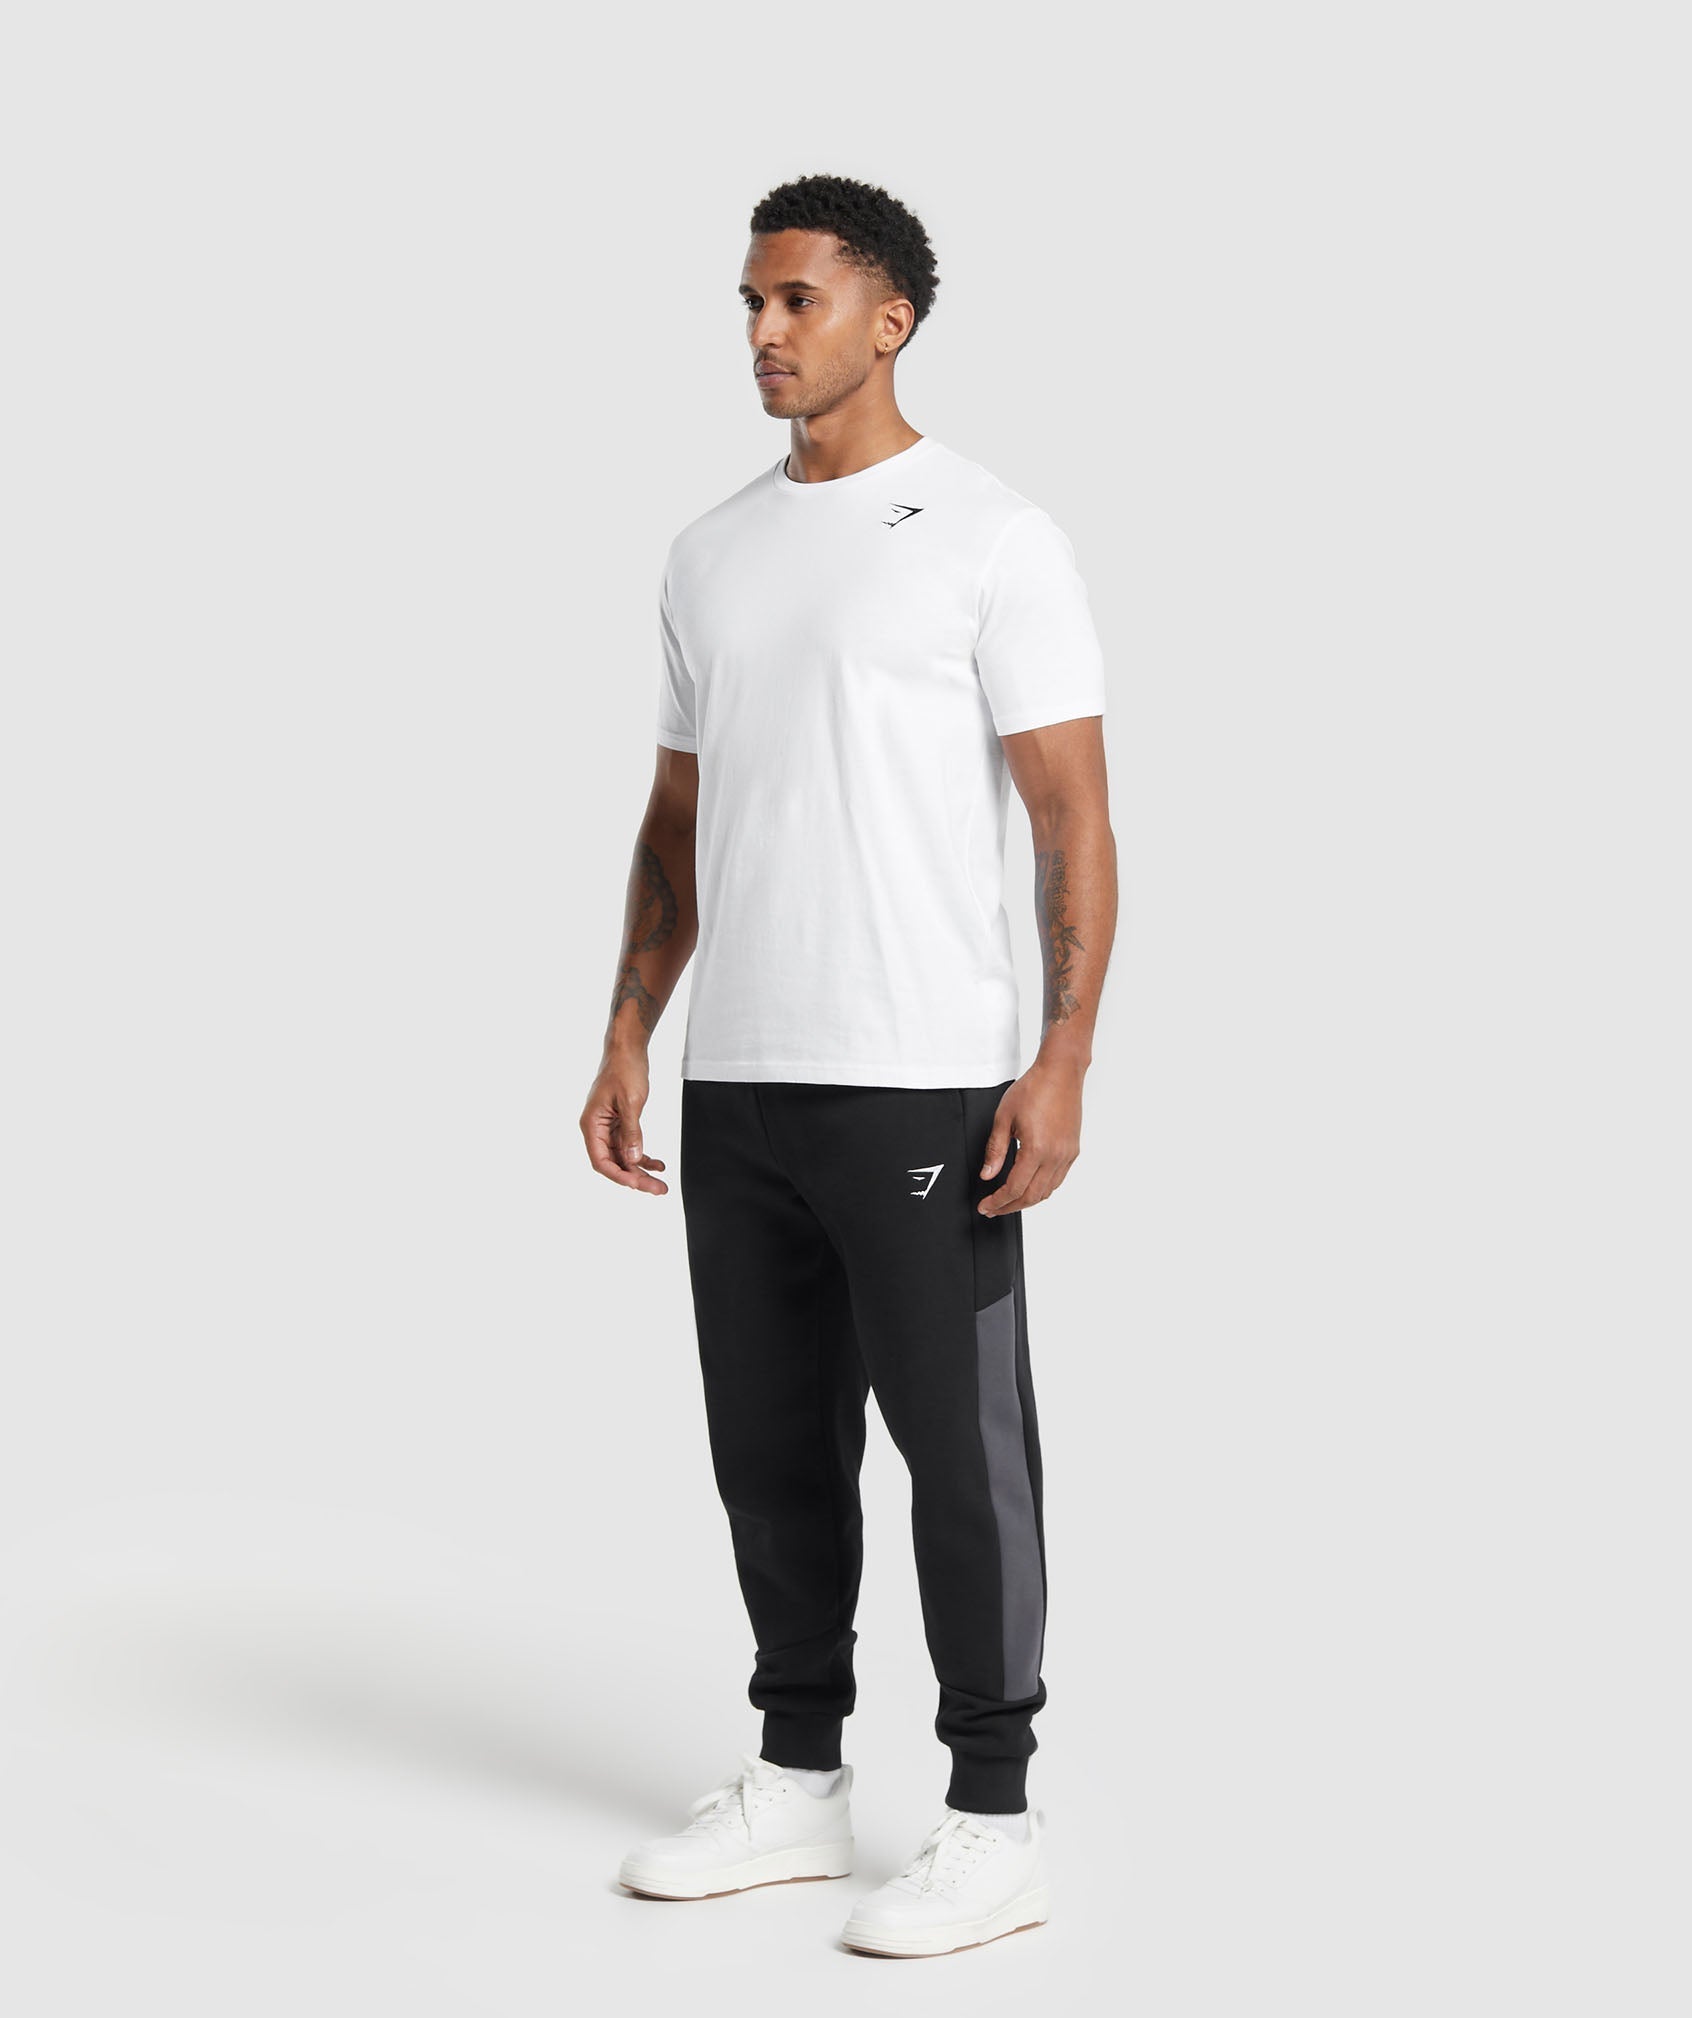 Pique Joggers in Black/Onyx Grey - view 4